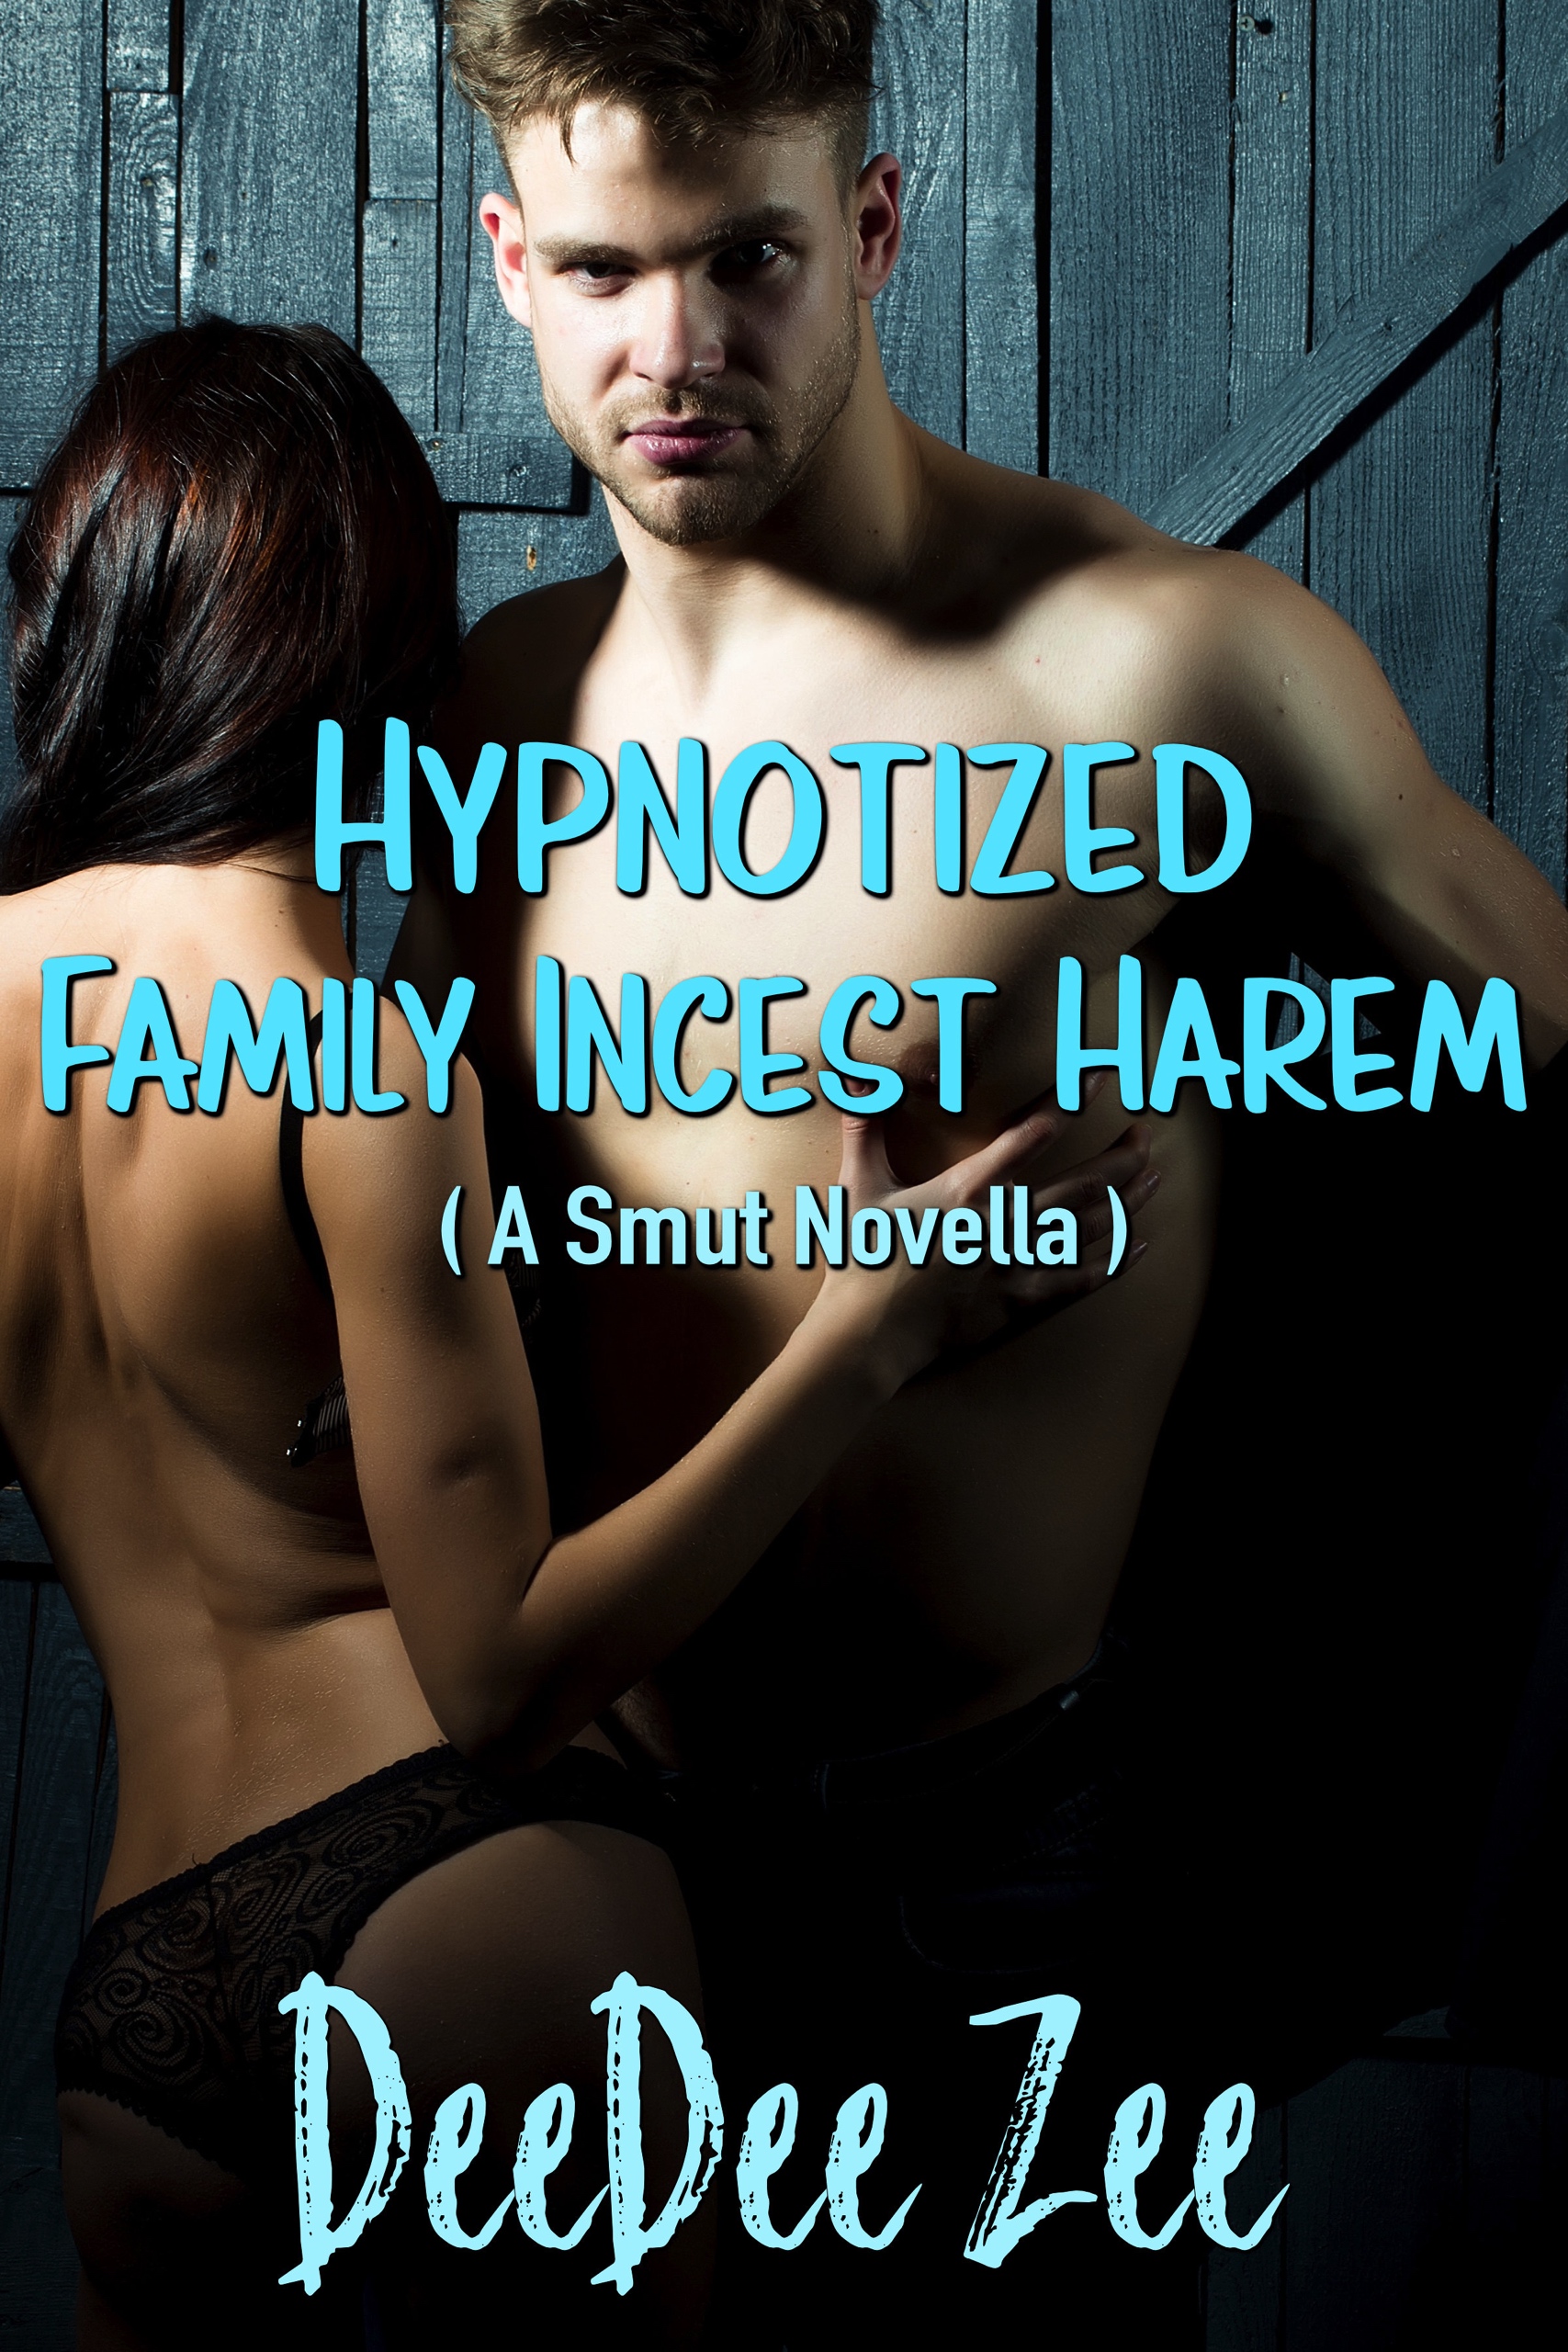 Hypnosis Incest Stories